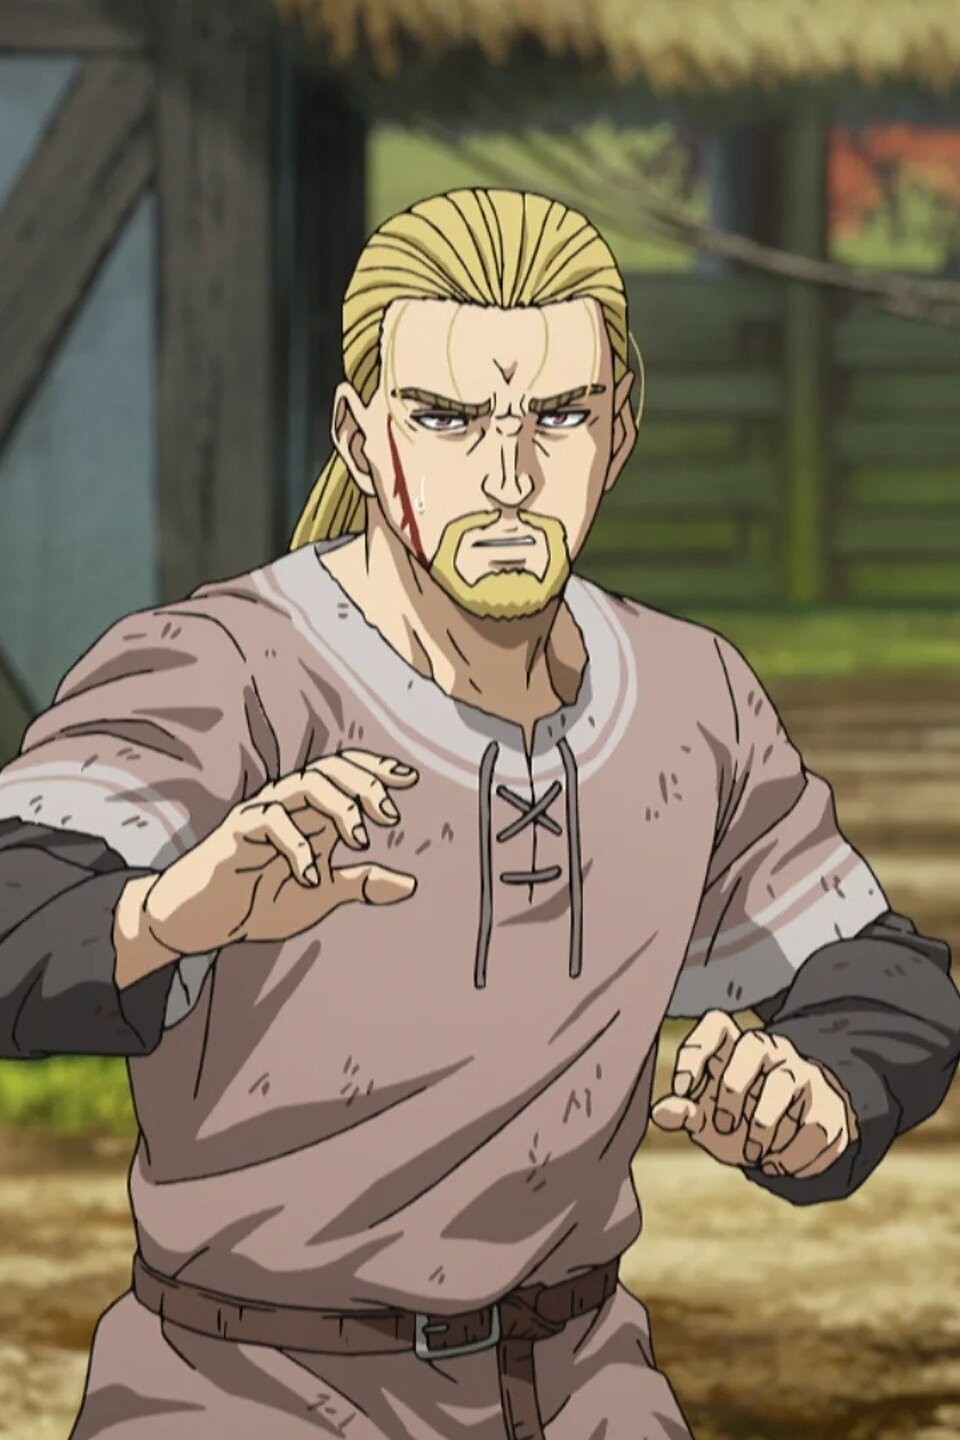 Vinland Saga Season 2 Episode 17 Release Date, Time and Where to Watch